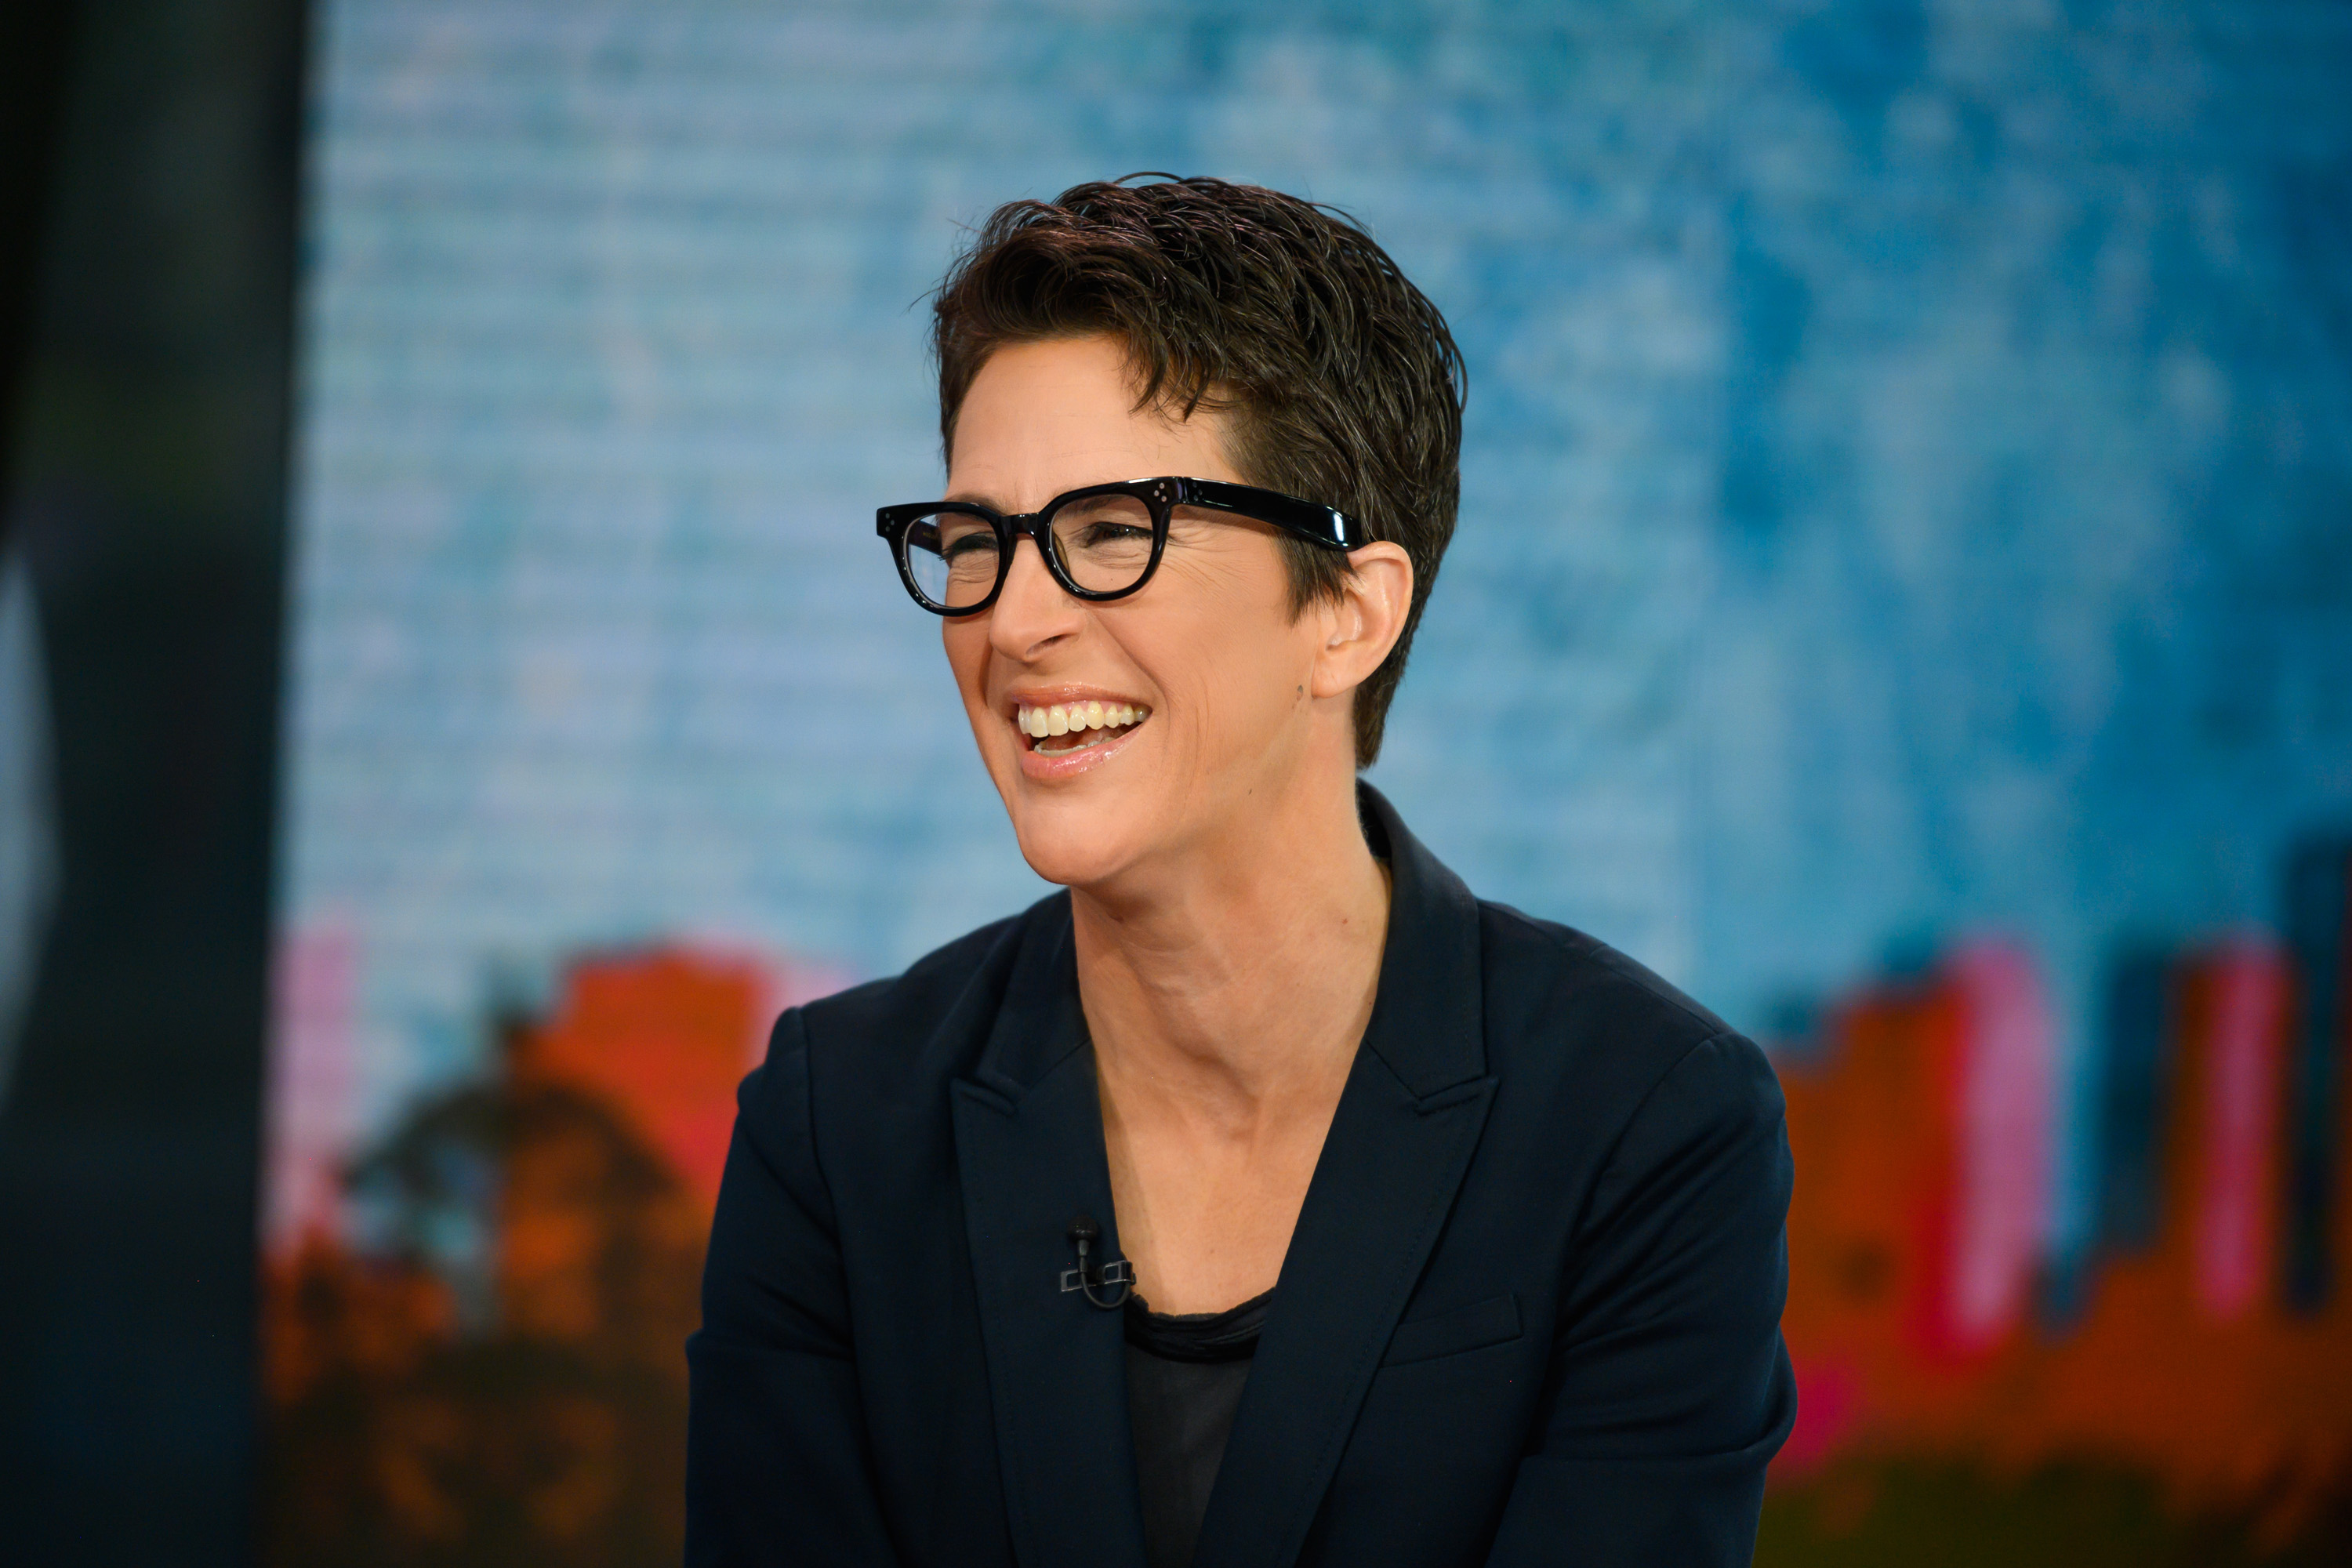 Rachel Maddow at the "Today" show on October 2, 2019 | Source: Getty Images